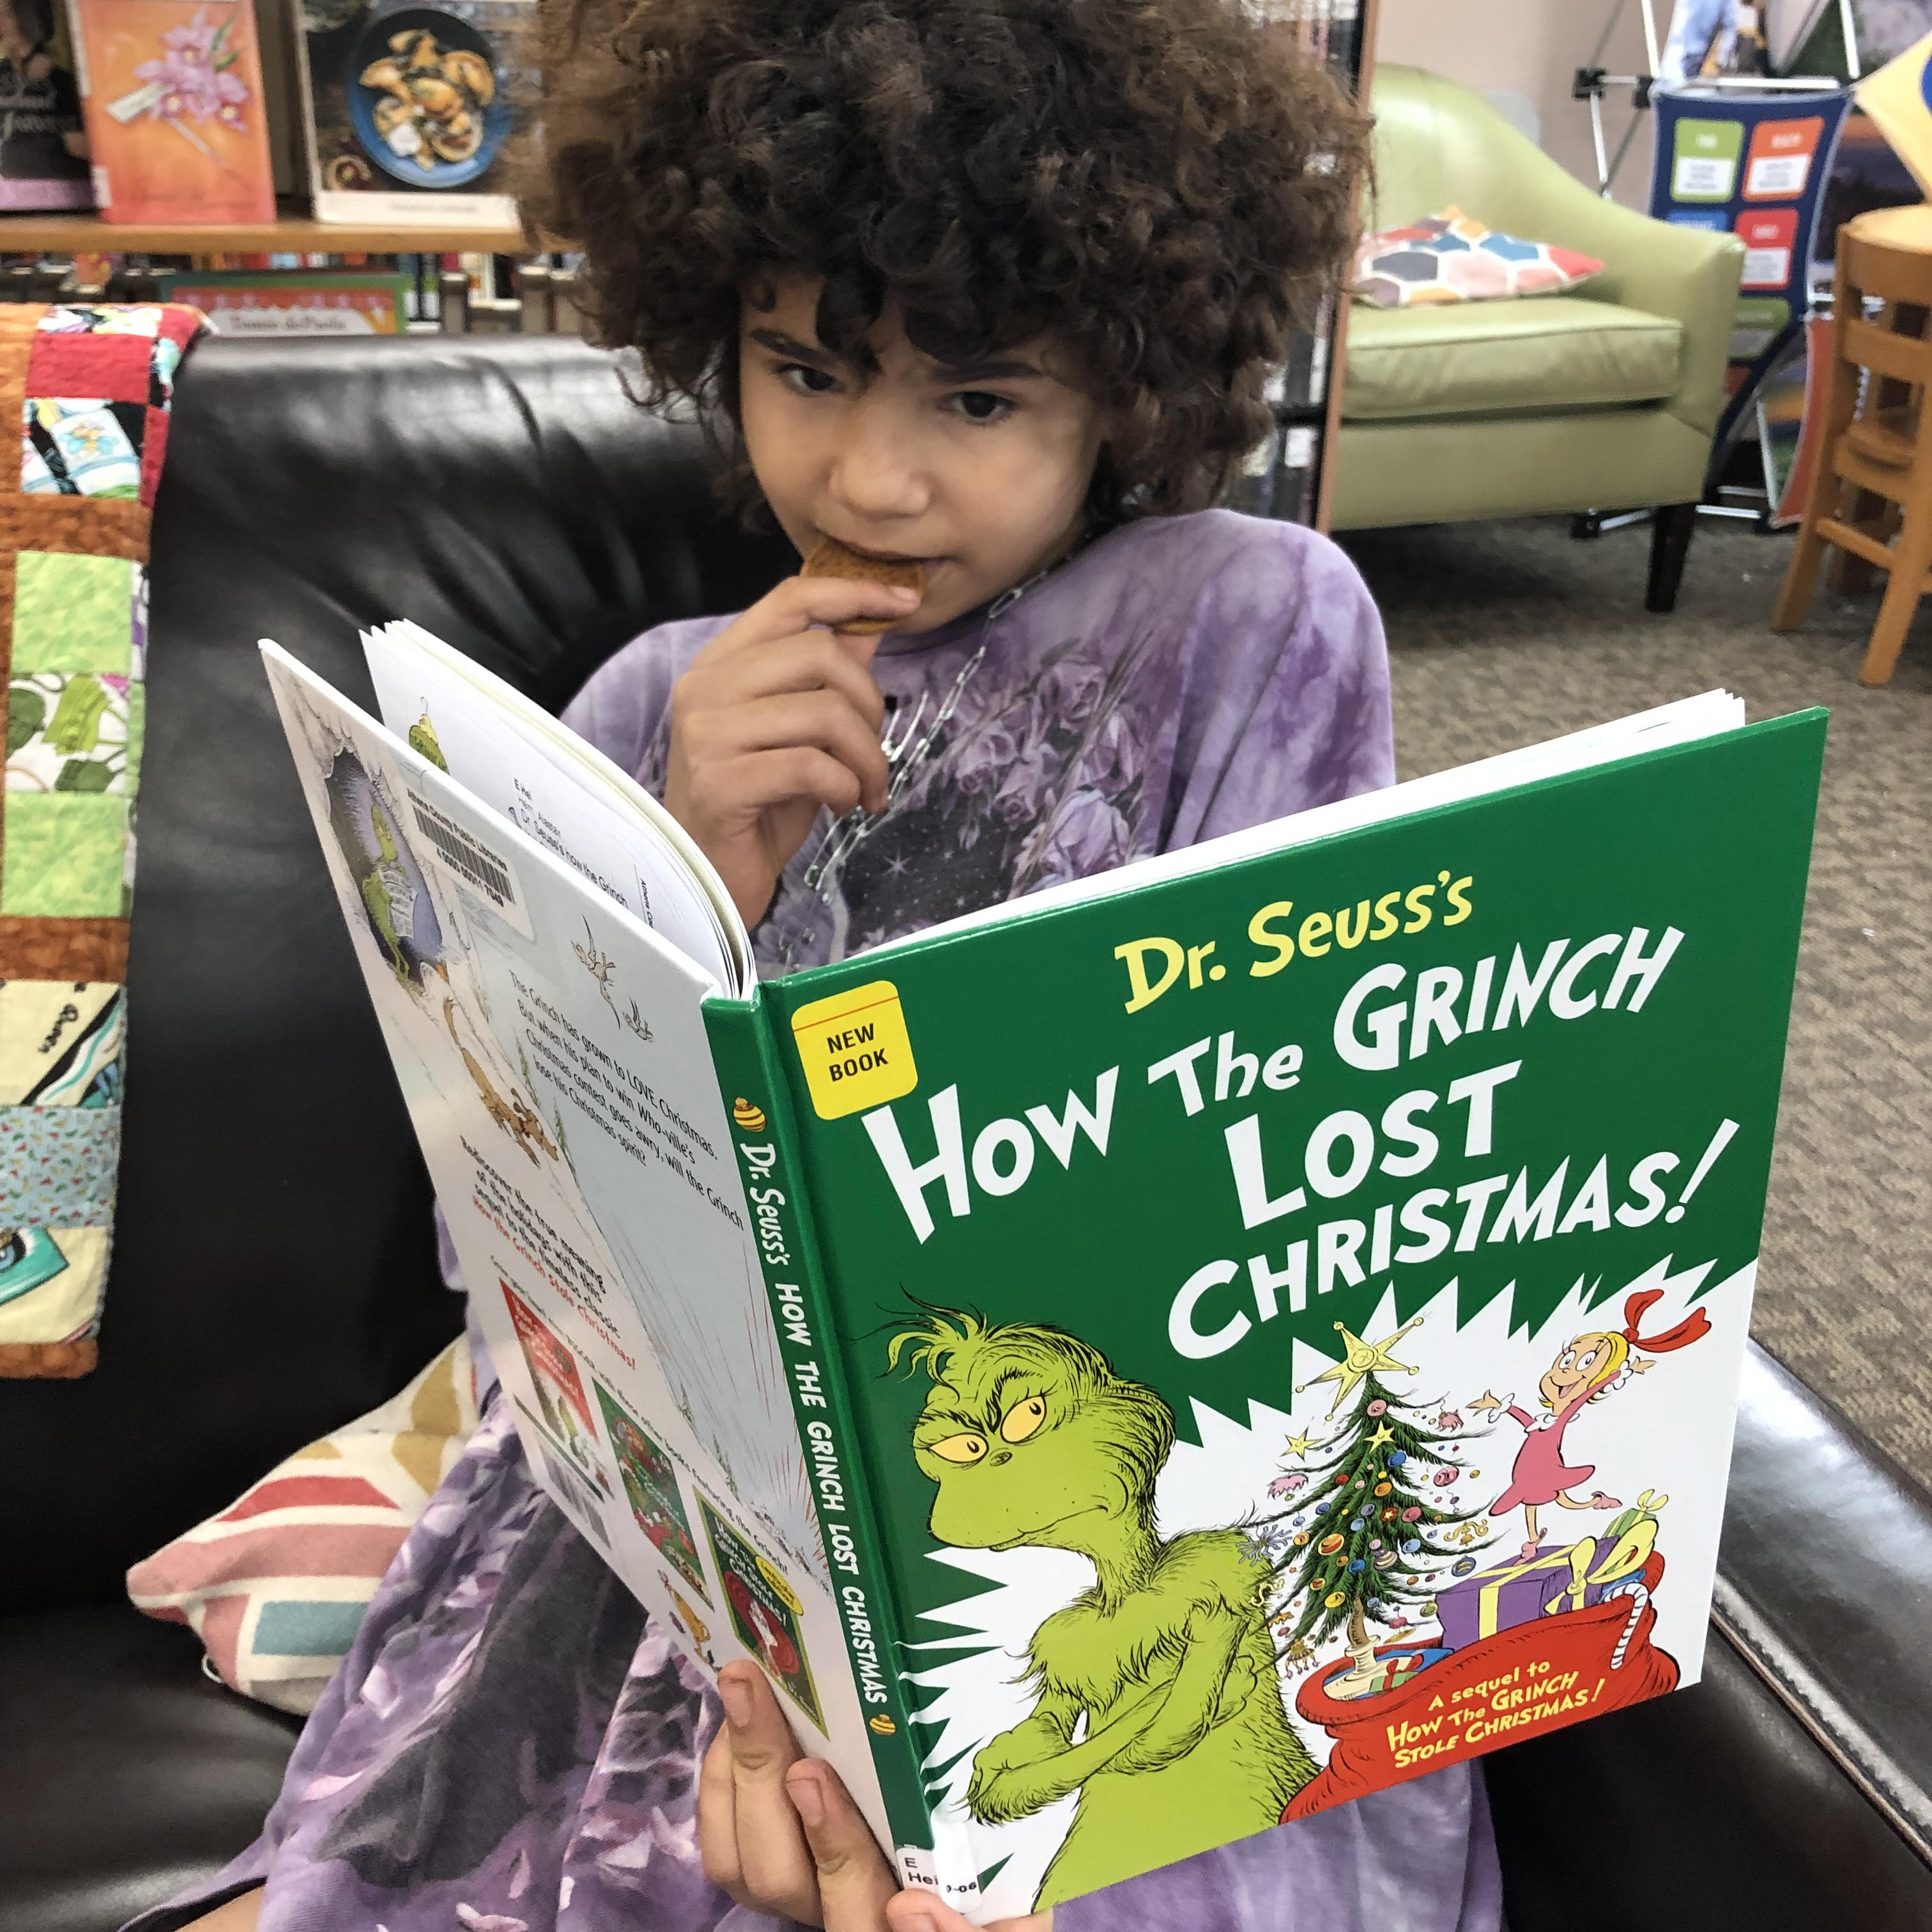 A 10-year-old in a purple shirt eats a cookie and reads "How the Grinch Lost Christmas"